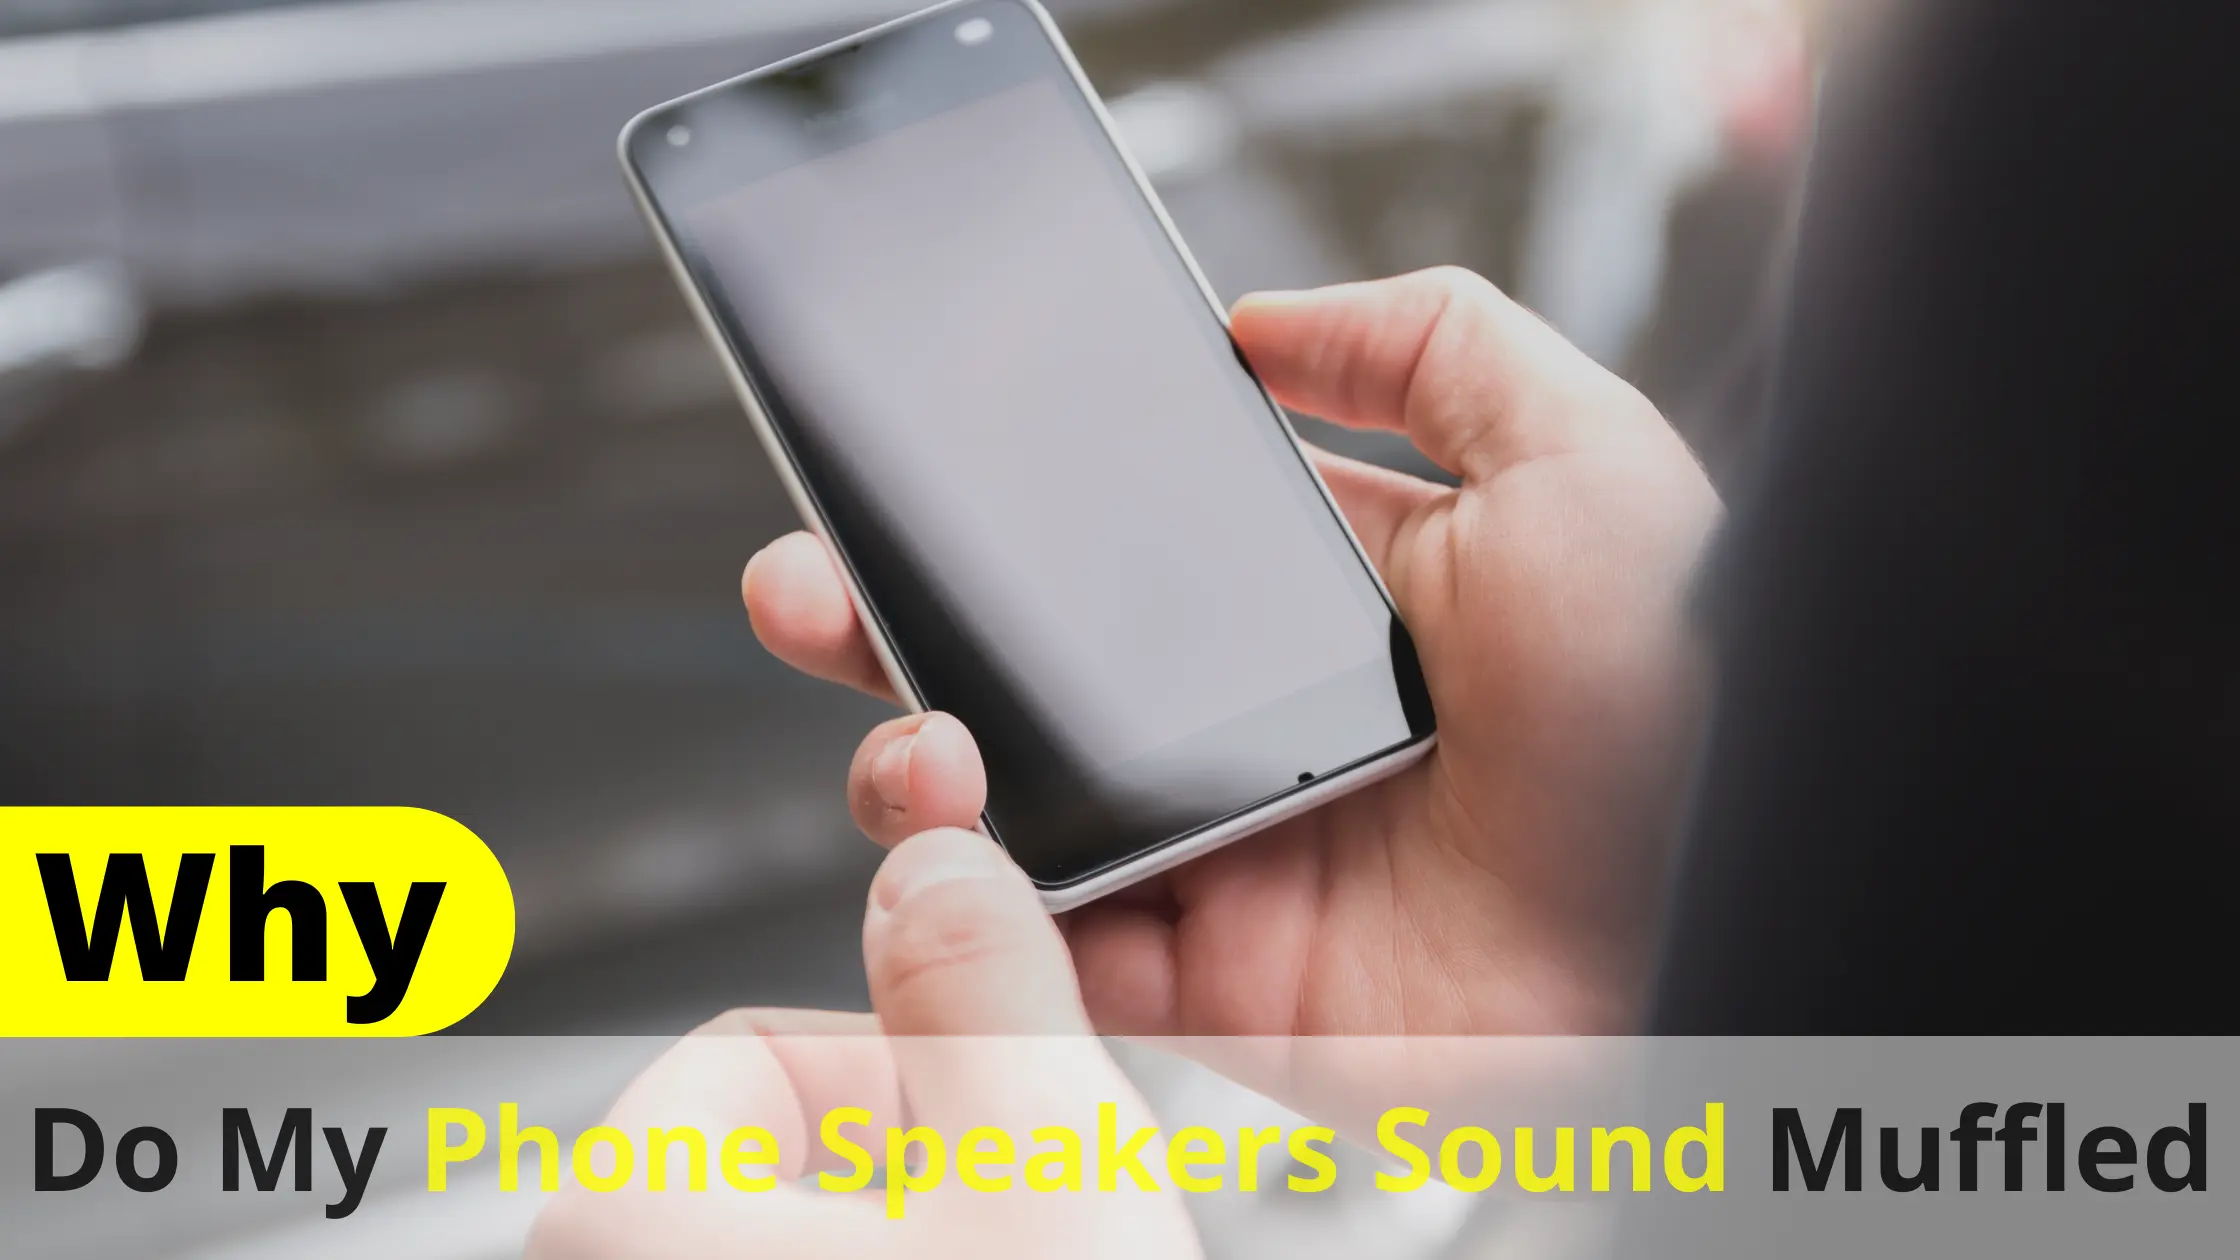 Why Do My Phone Speakers Sound Muffled? Latest Guide